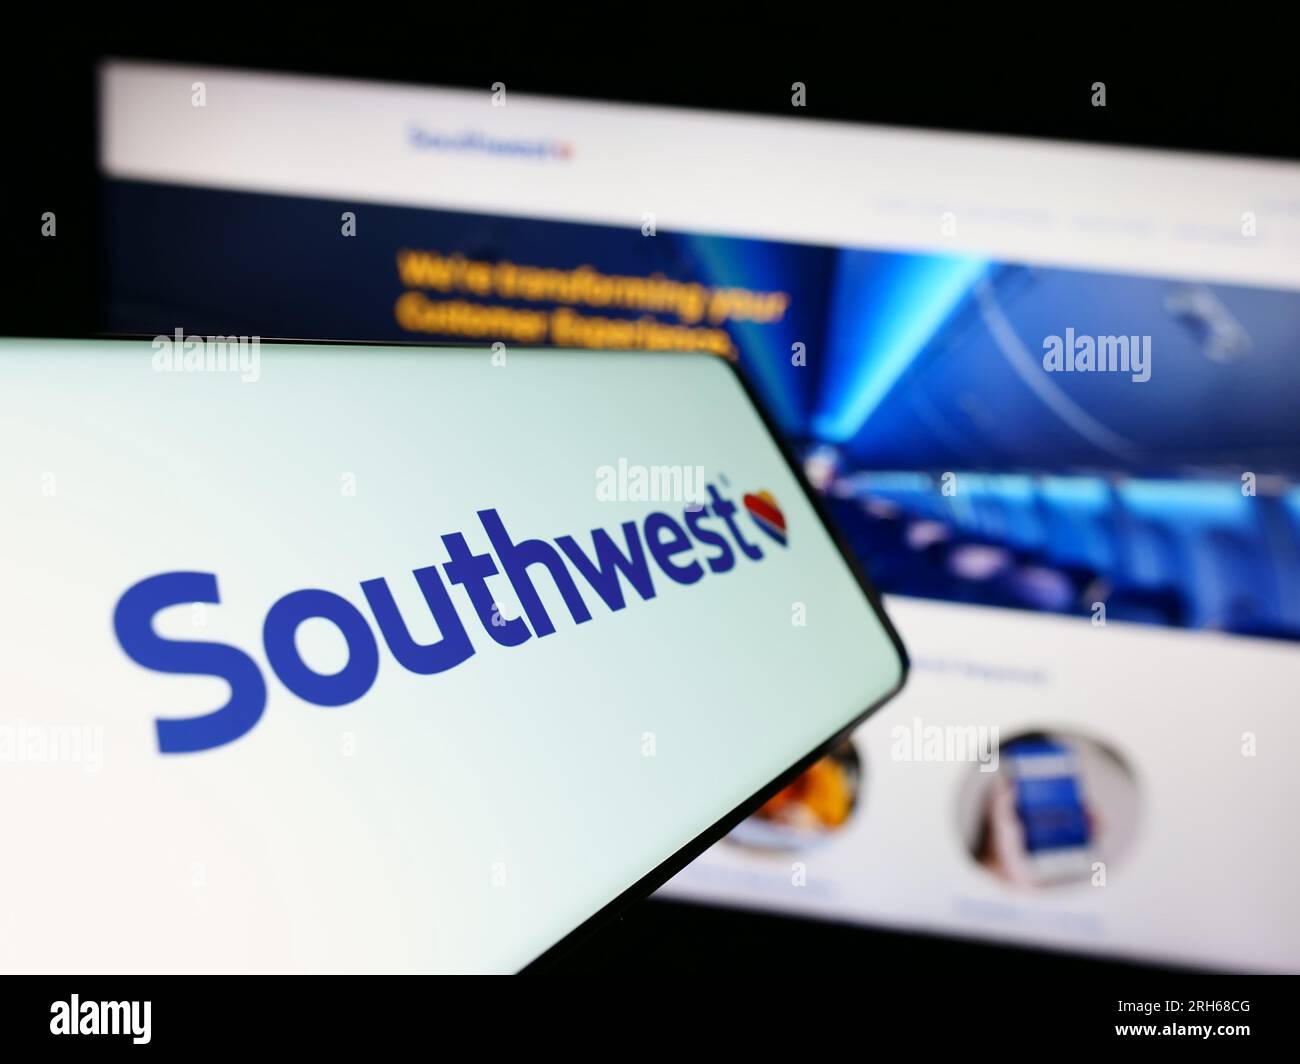 Mobile phone with logo of American airline company Southwest Airlines Co. on screen in front of website. Focus on center of phone display. Stock Photo